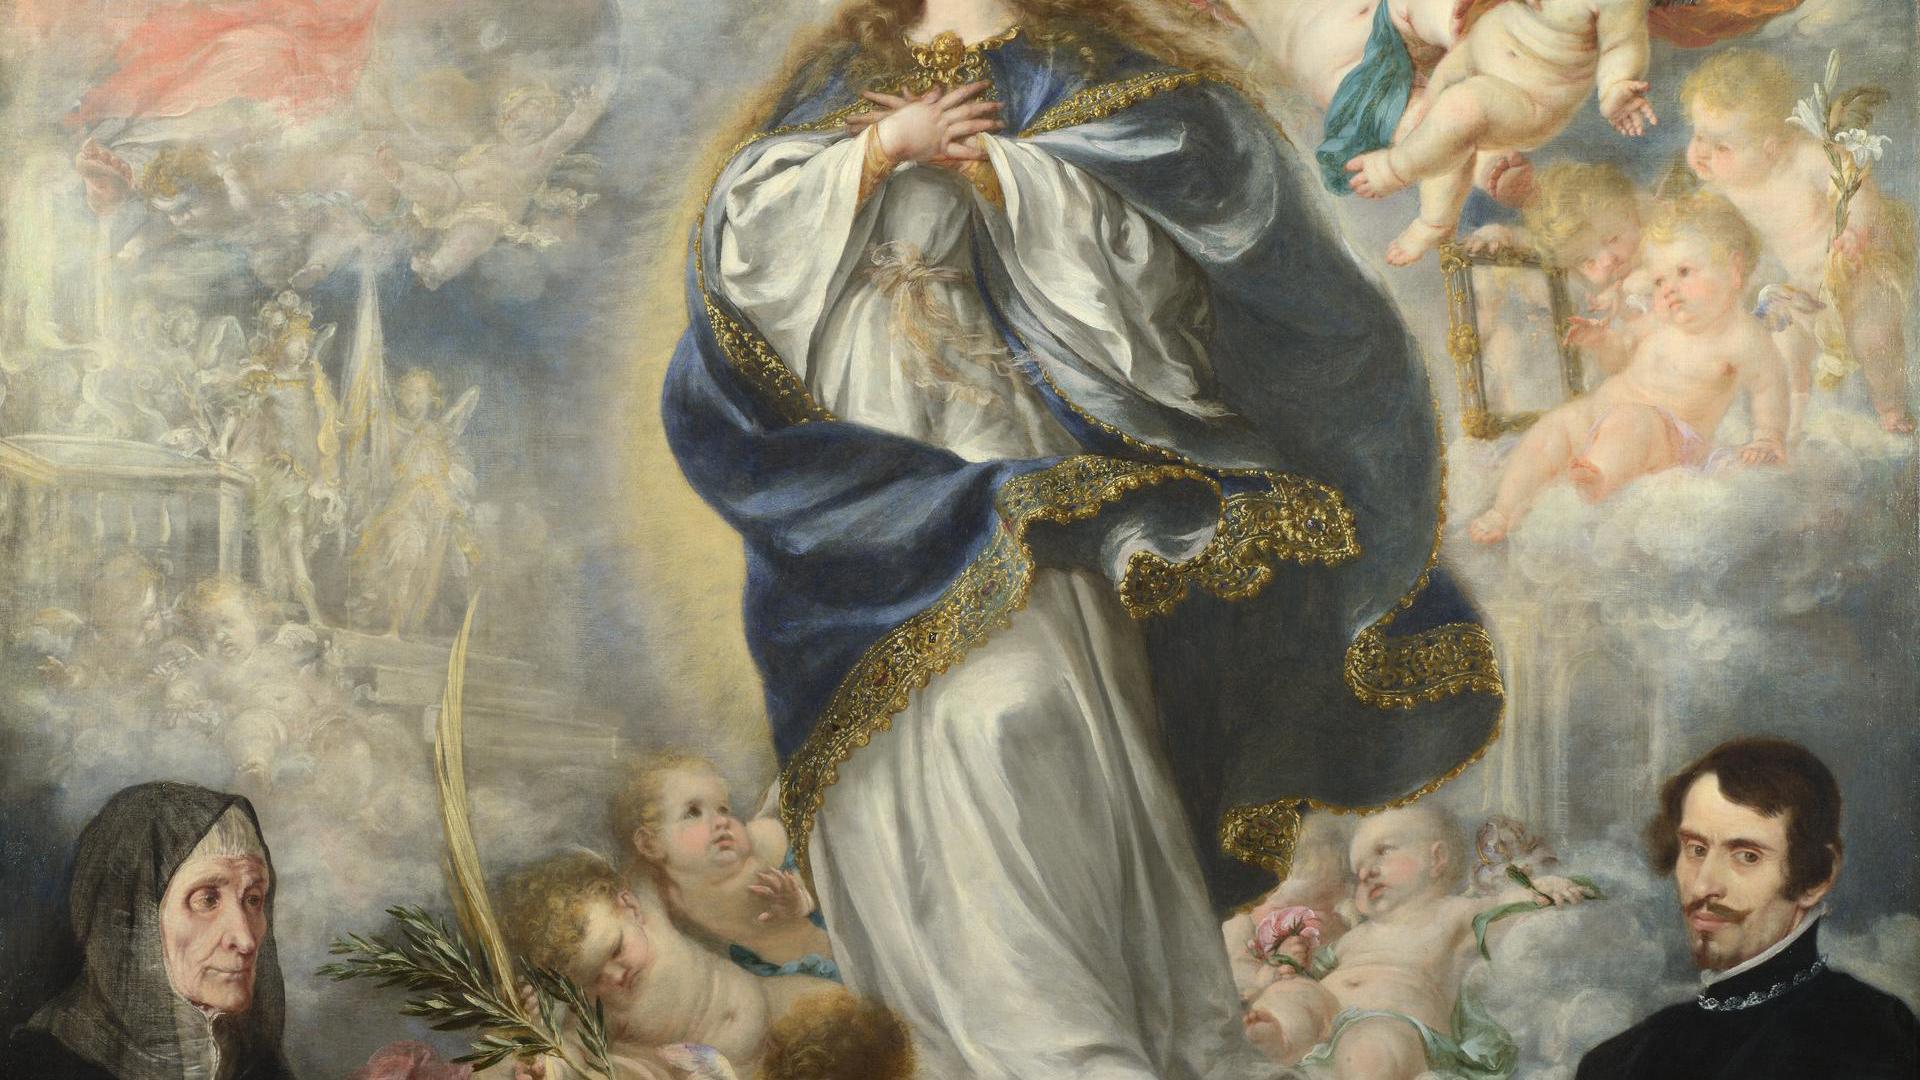 The Immaculate Conception with Two Donors by Juan de Valdes Leal